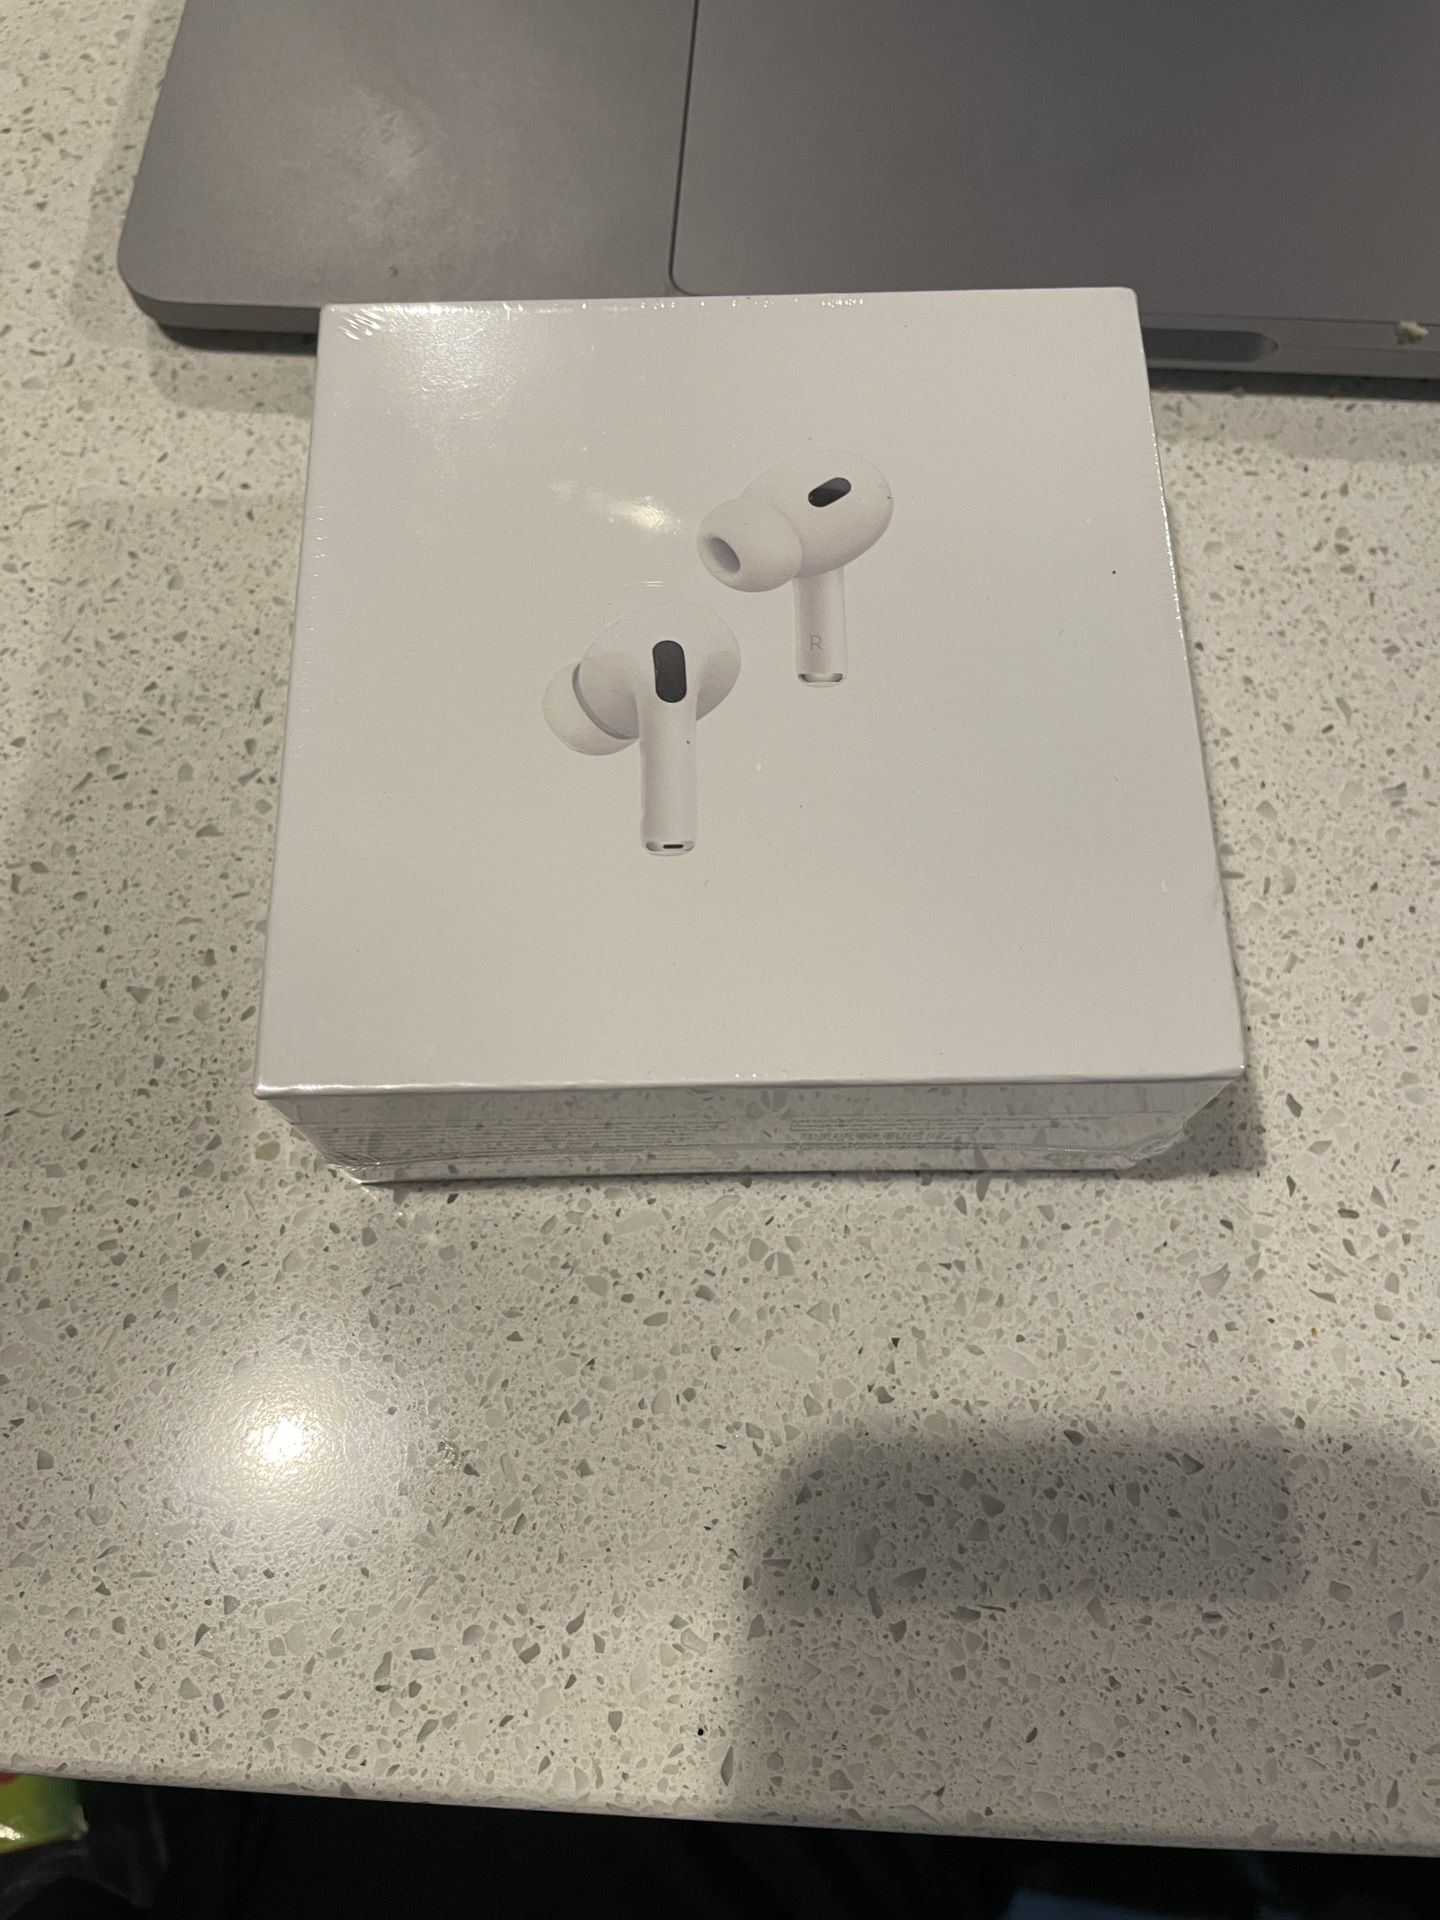 Airpods pro For Sale